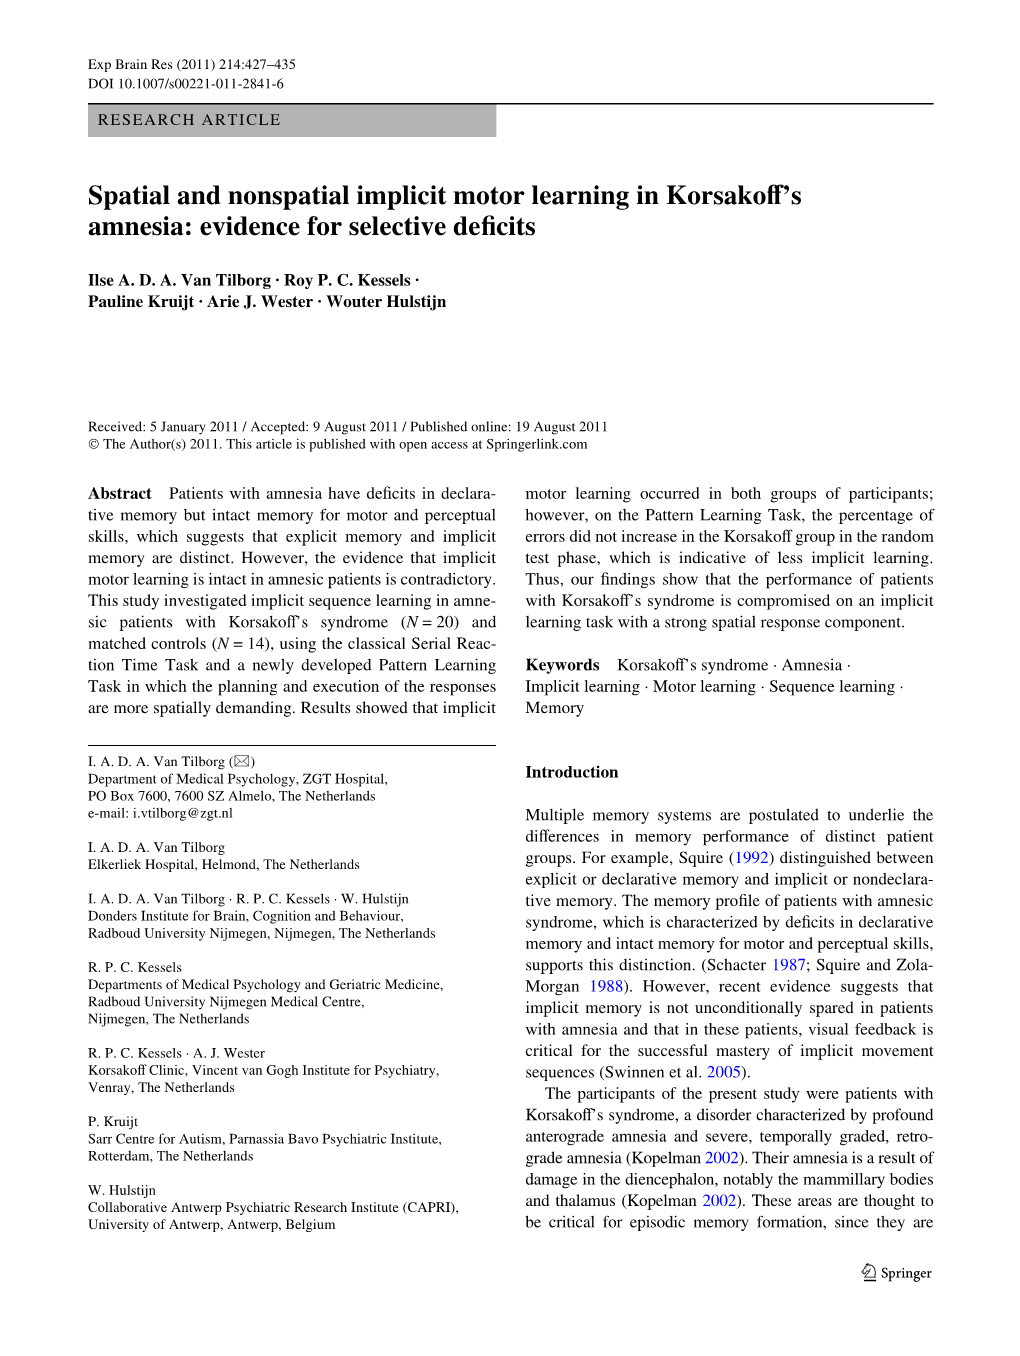 Spatial and Nonspatial Implicit Motor Learning in Korsakov’S Amnesia: Evidence for Selective Dewcits